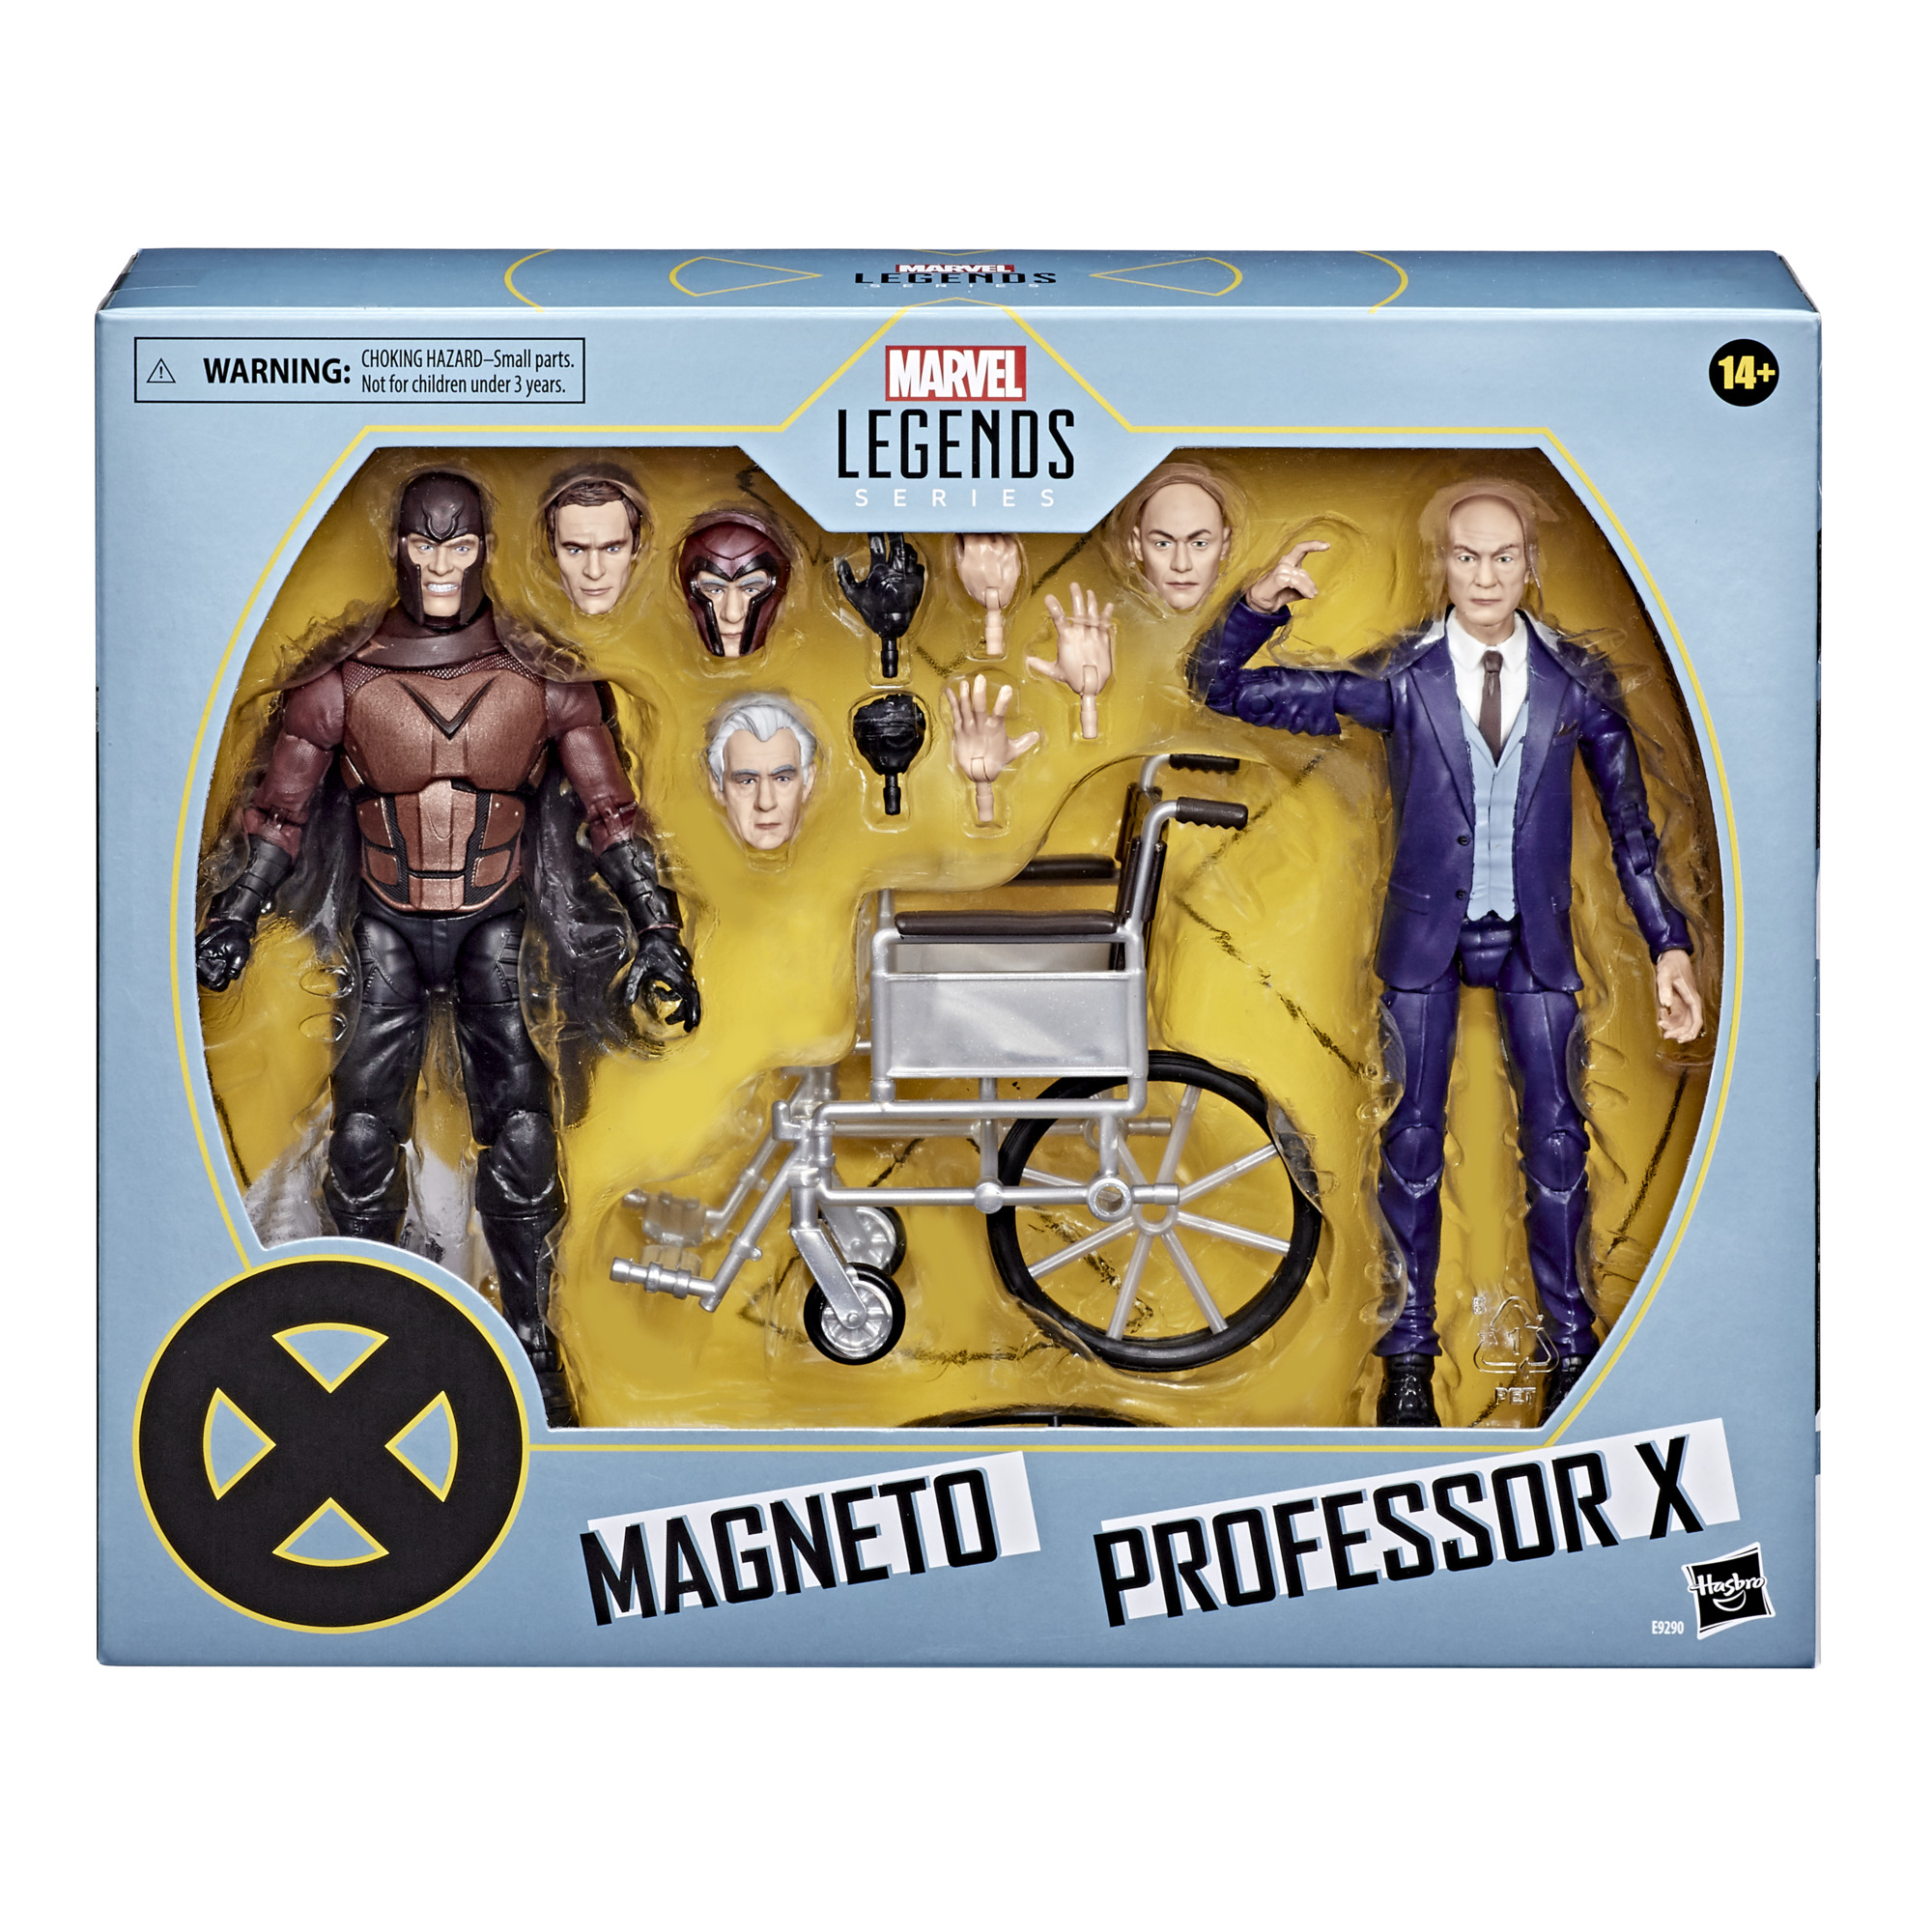 Magneto and Charles in package